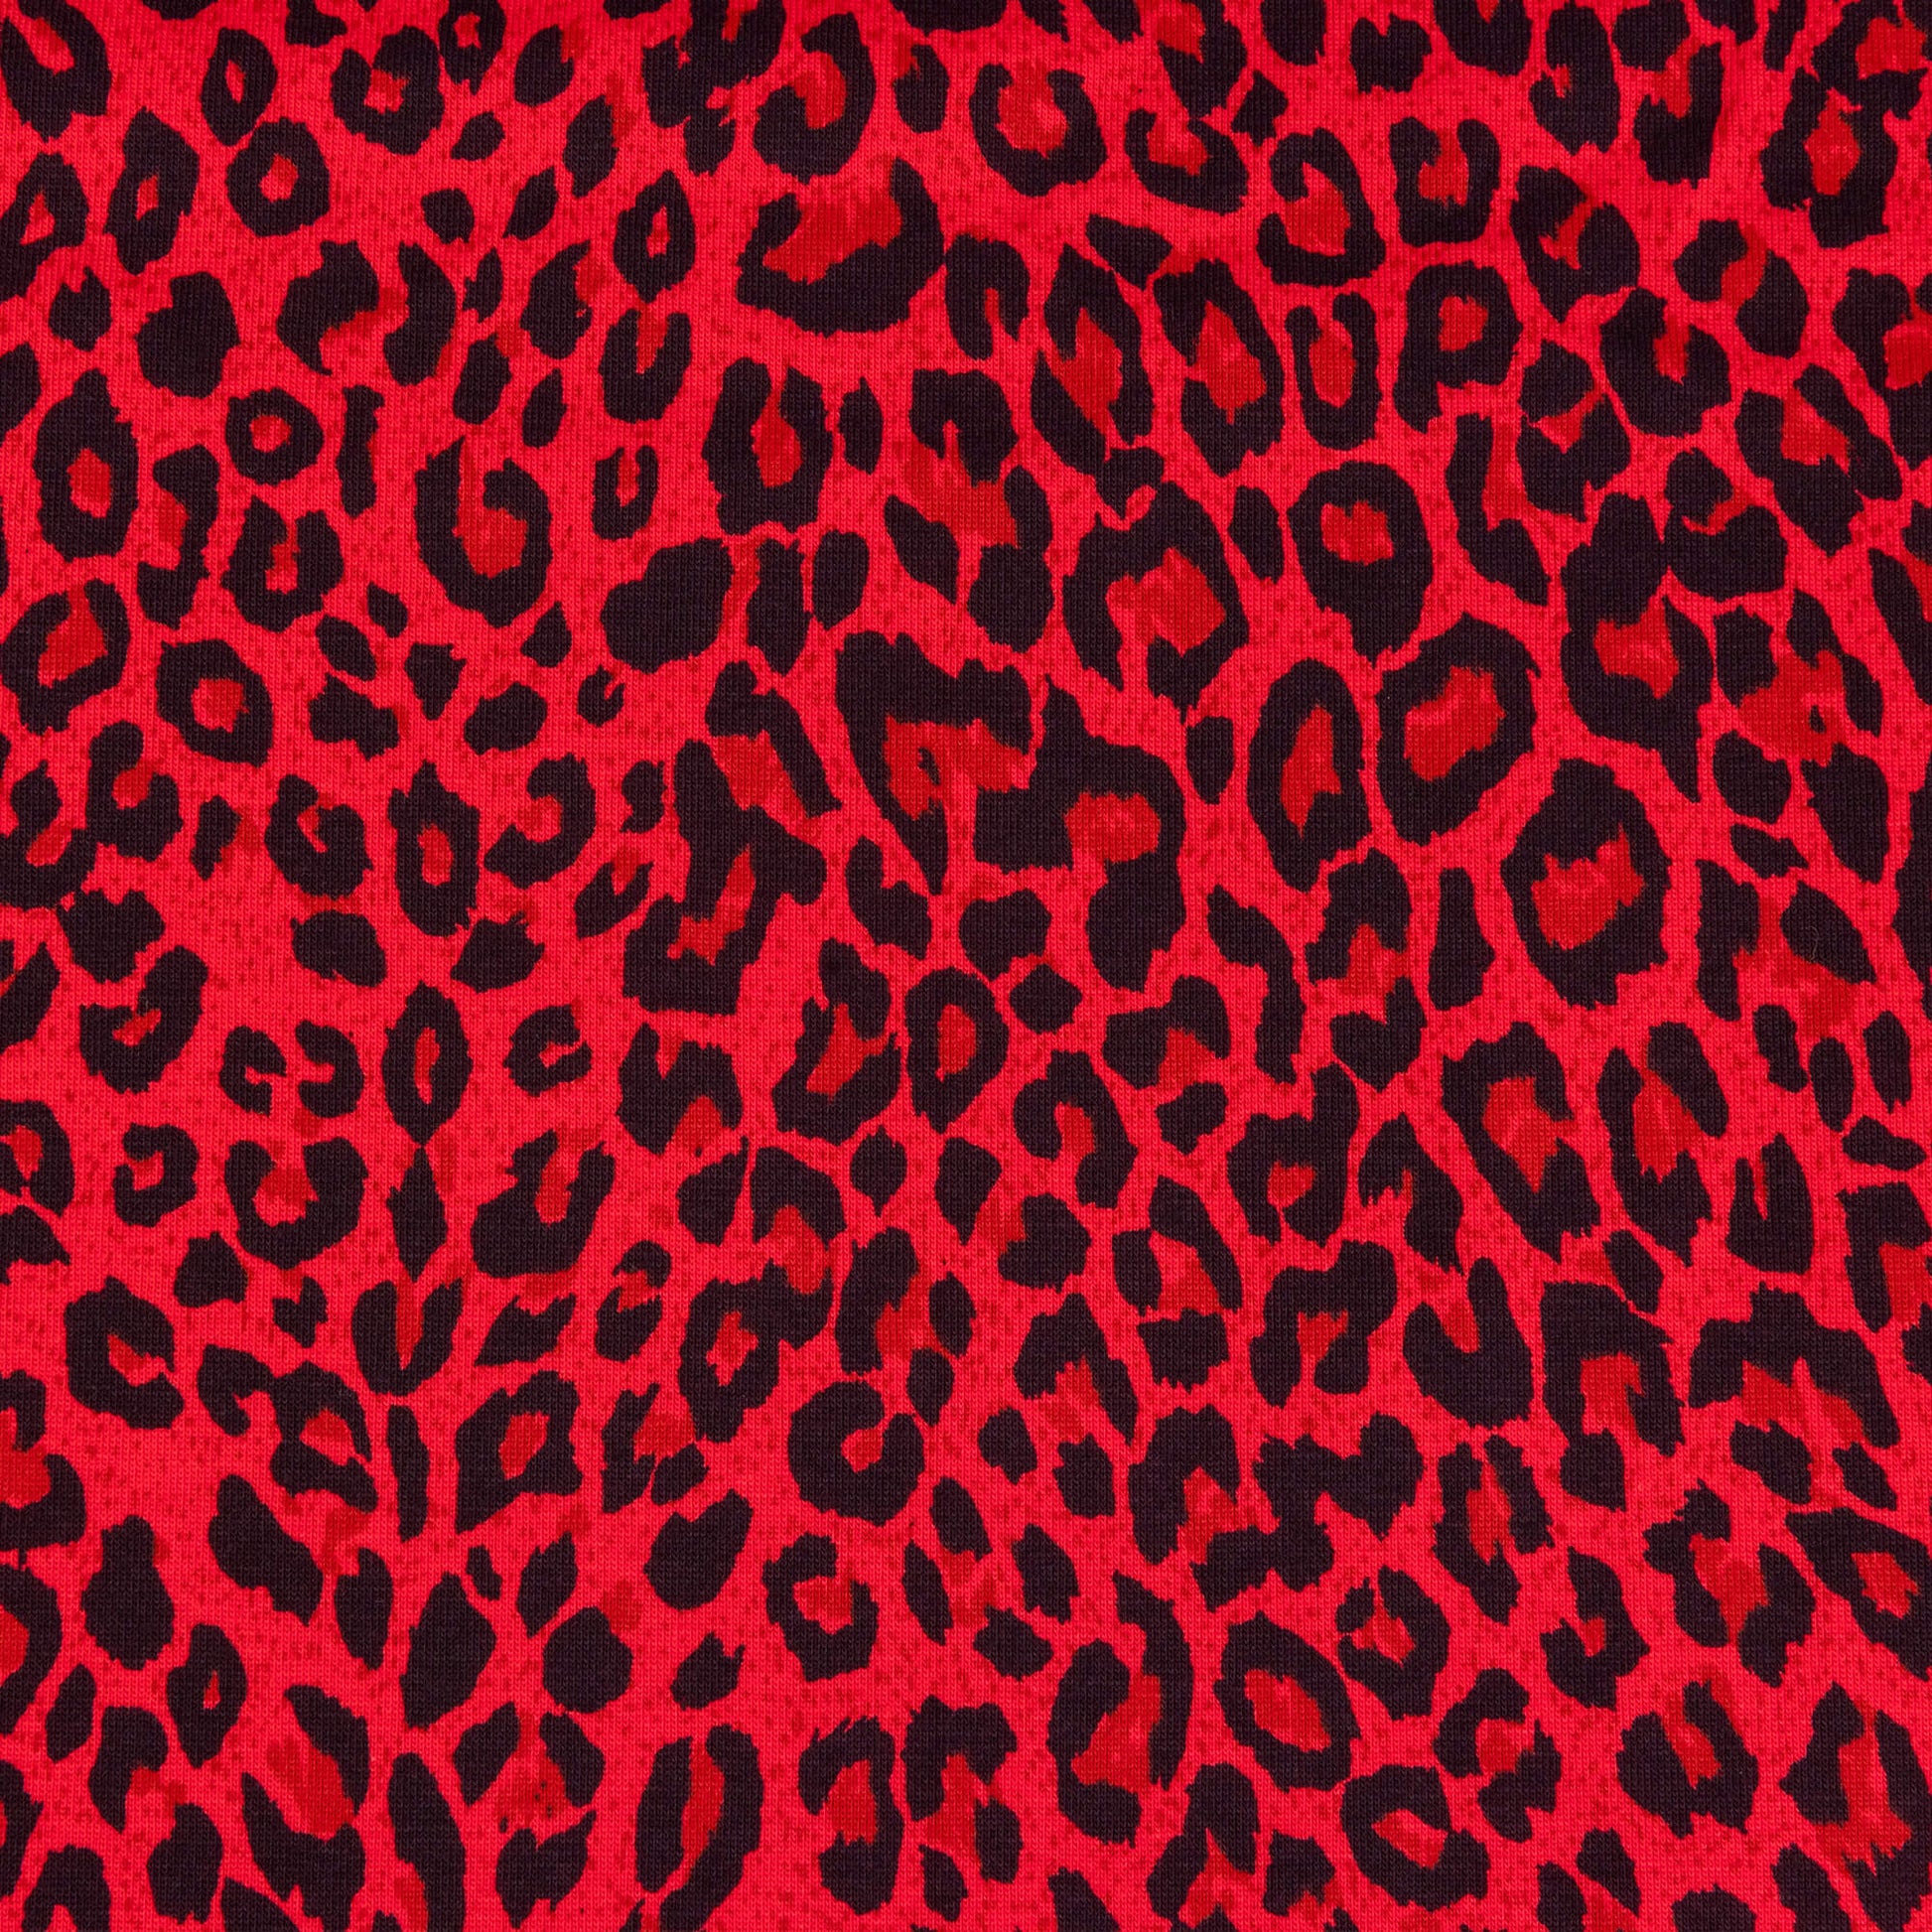 A close up of bright red and black leopard print fabric in a soft jersey t-shirt weight perfect for crafting